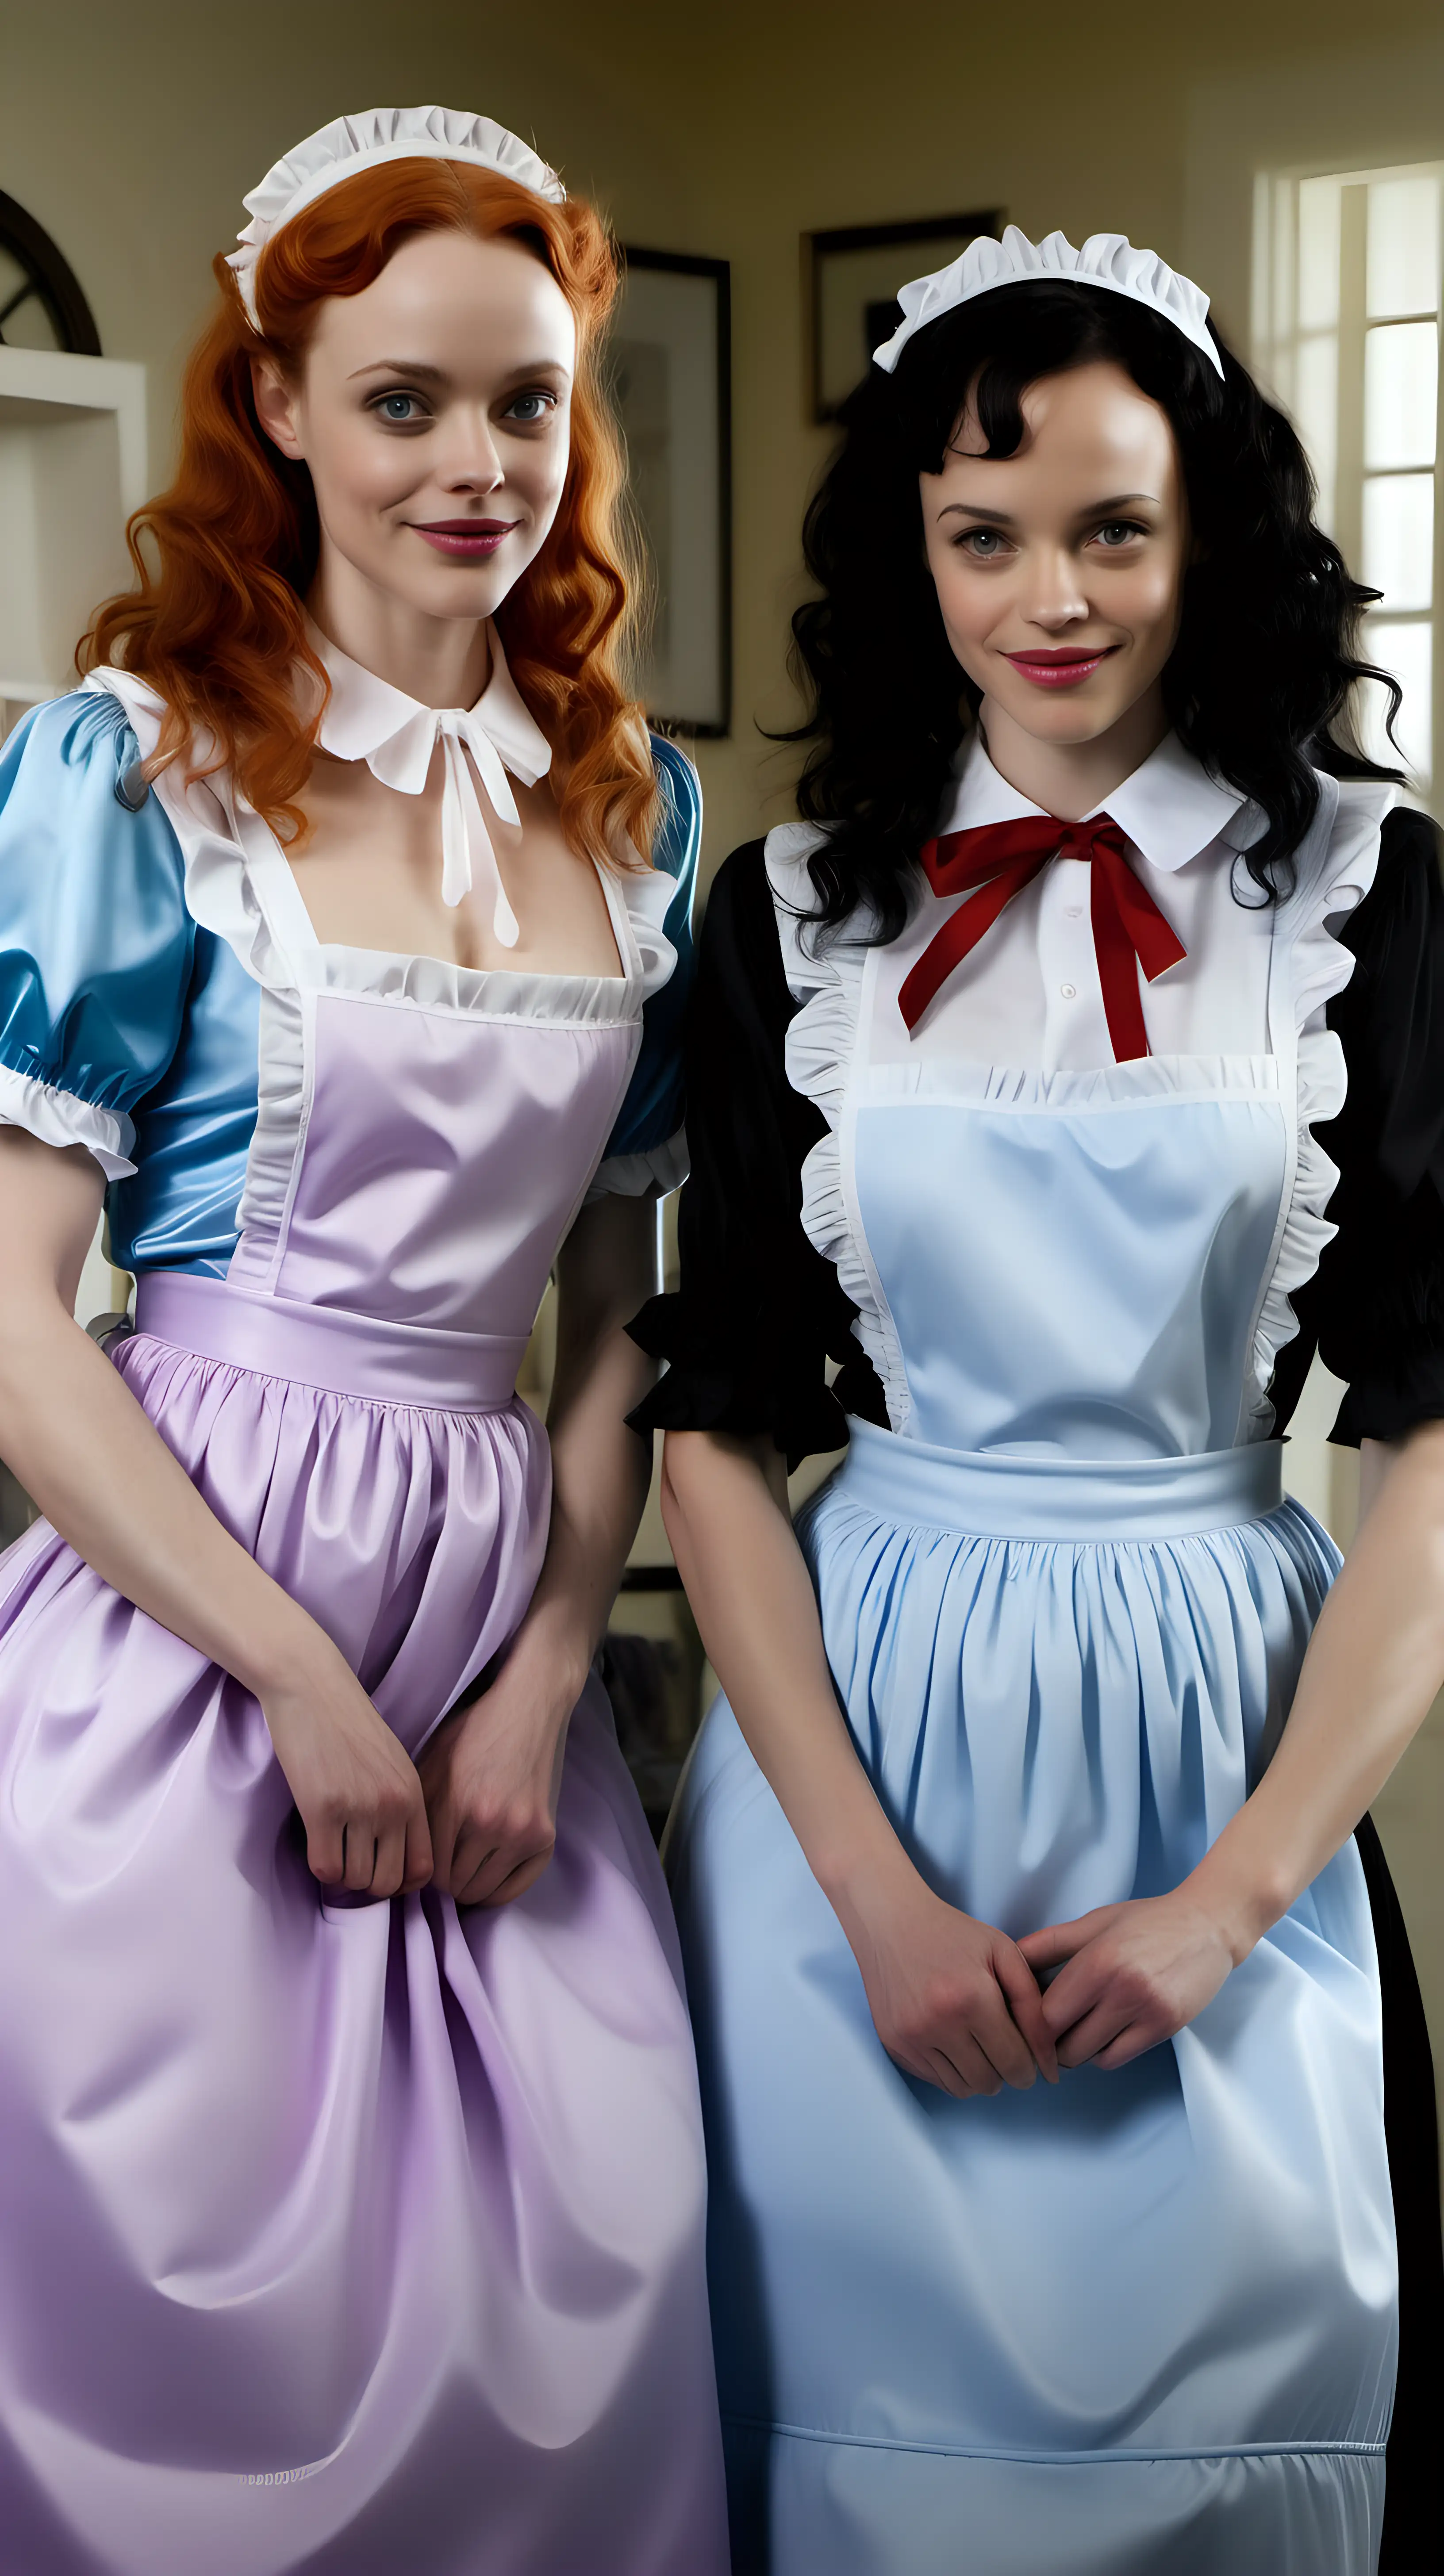 Charming Retro Maid Gowns Elegant Girls and Stylish Milfs Smiling in a Blue and Lilac Setting